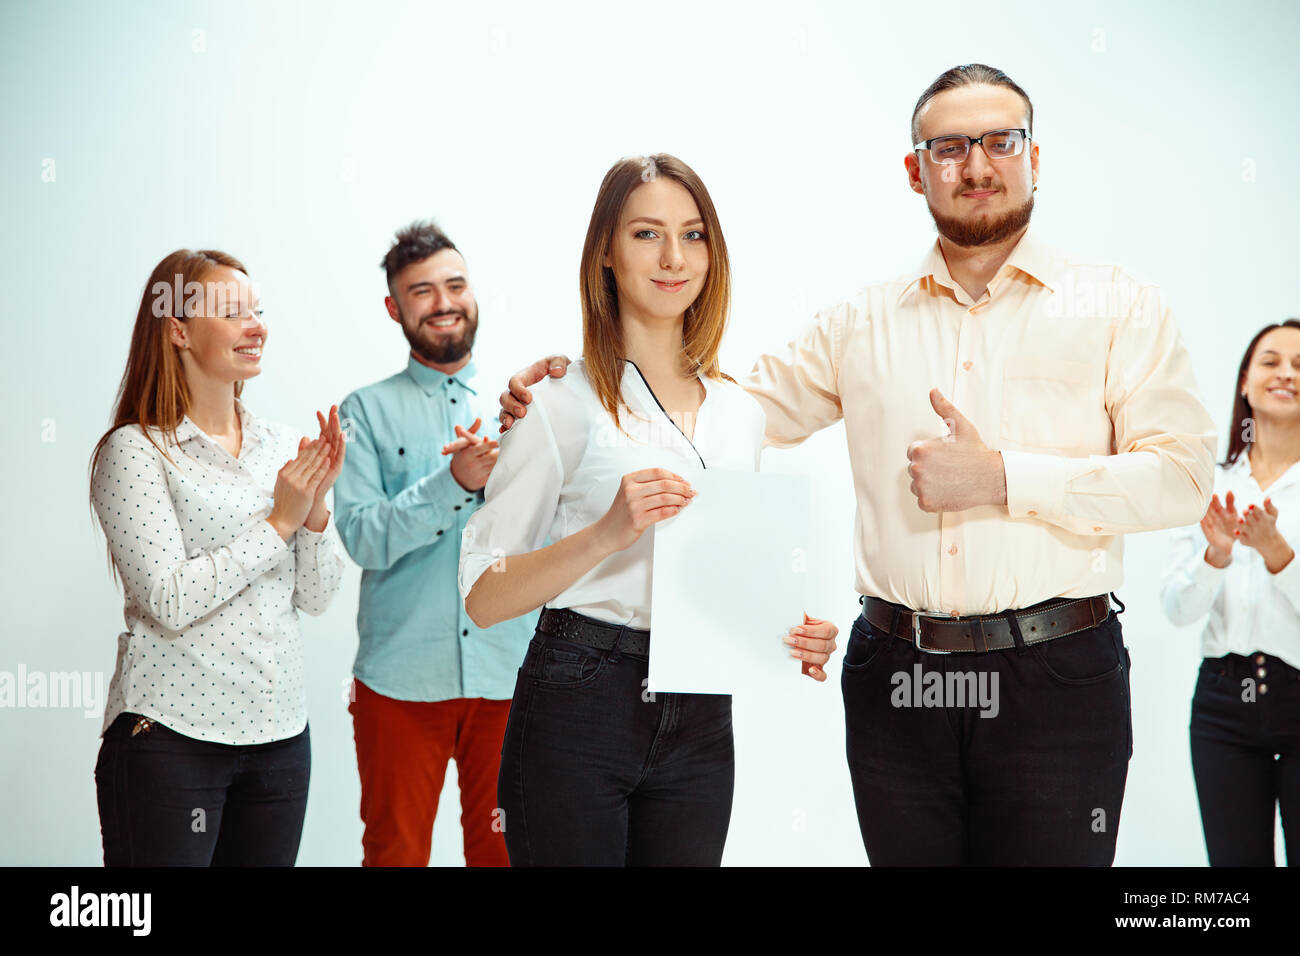 Boss approving and congratulating young successful employee of the company for her successes and good work. National Employee Appreciation Day, businesswoman, businessman, business, success, admire, career growth concept. Stock Photo